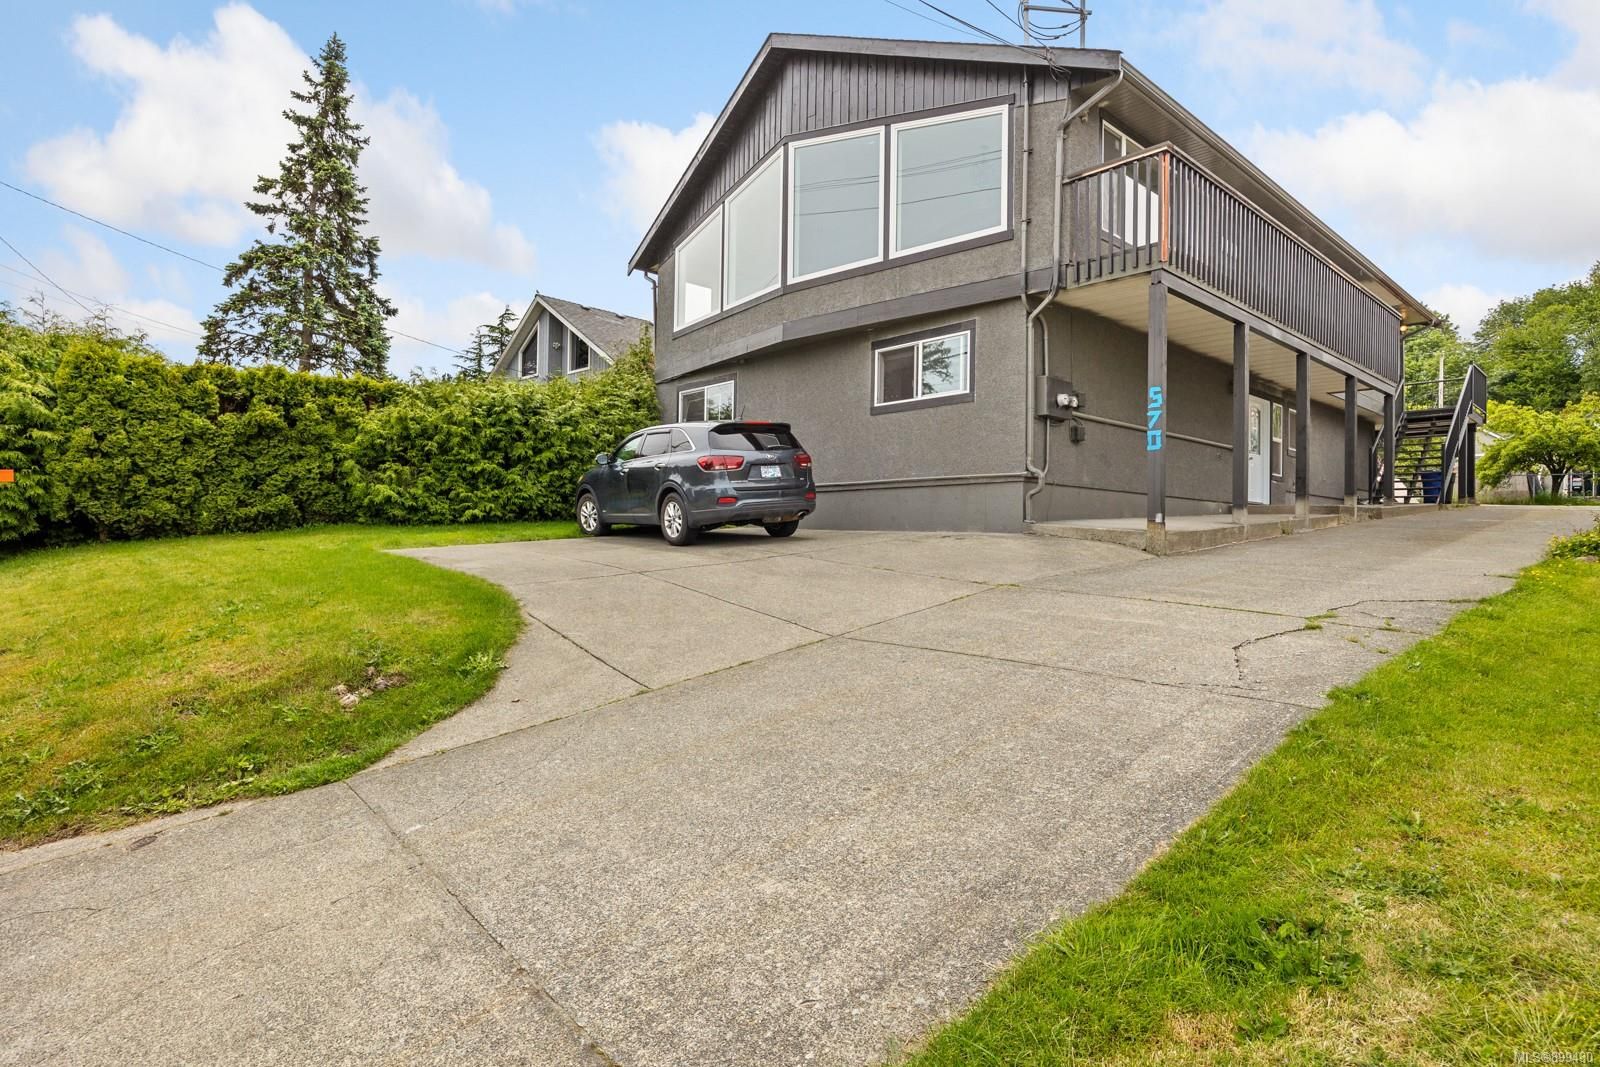 I have sold a property at 570 Island Hwy in Campbell River
